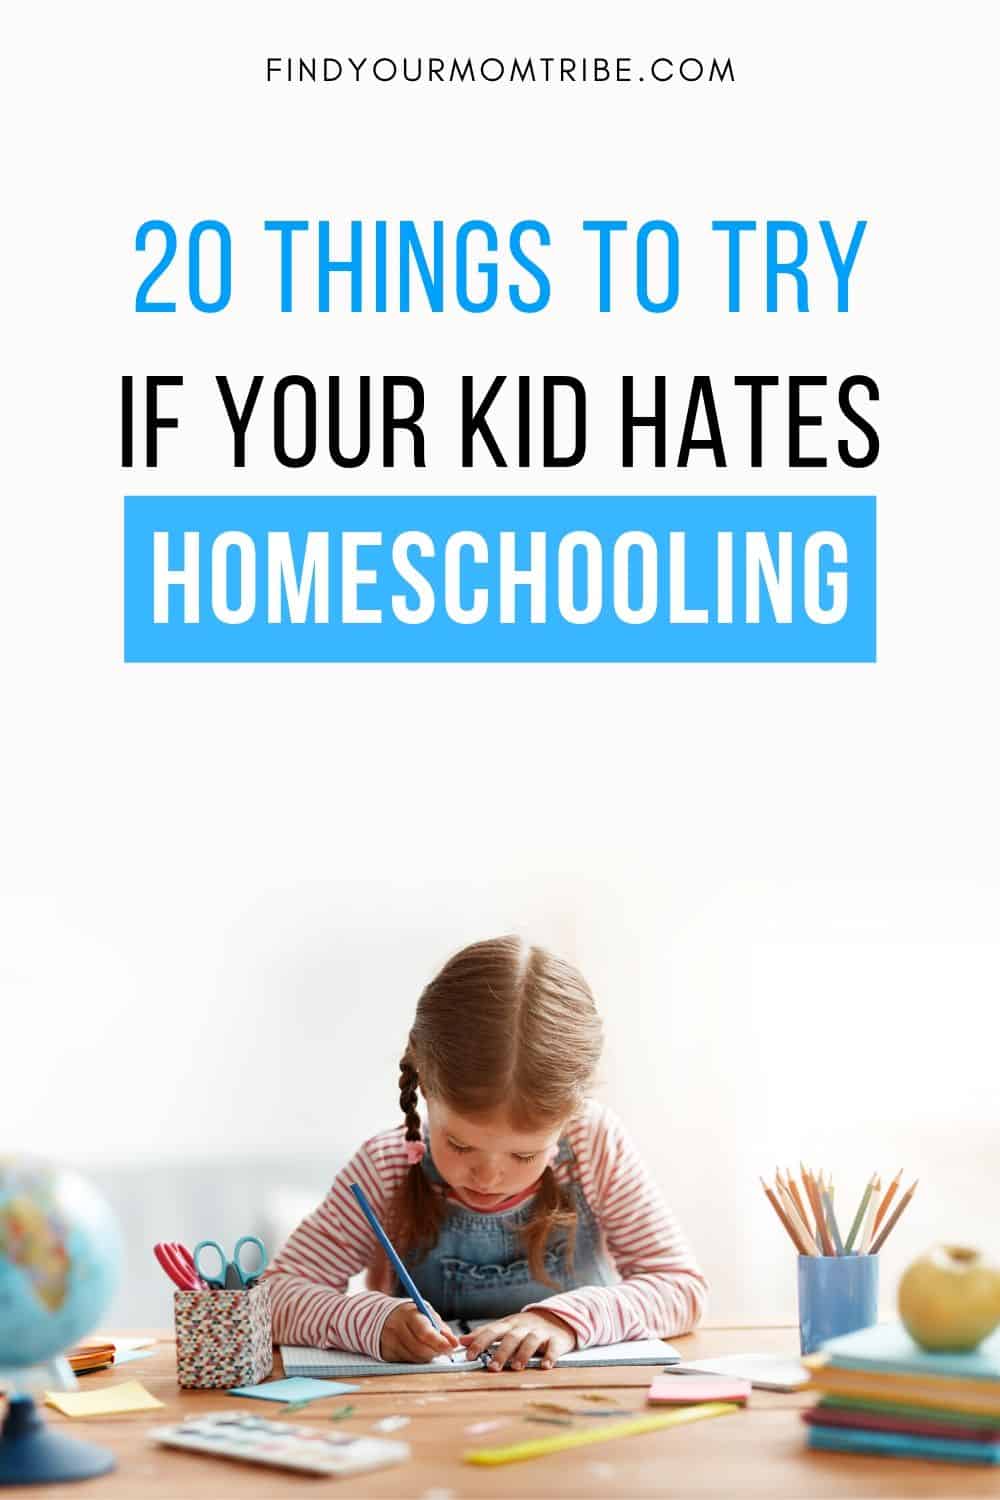 Pinterest 20 Things to Try if Your Kid Hates Homeschooling